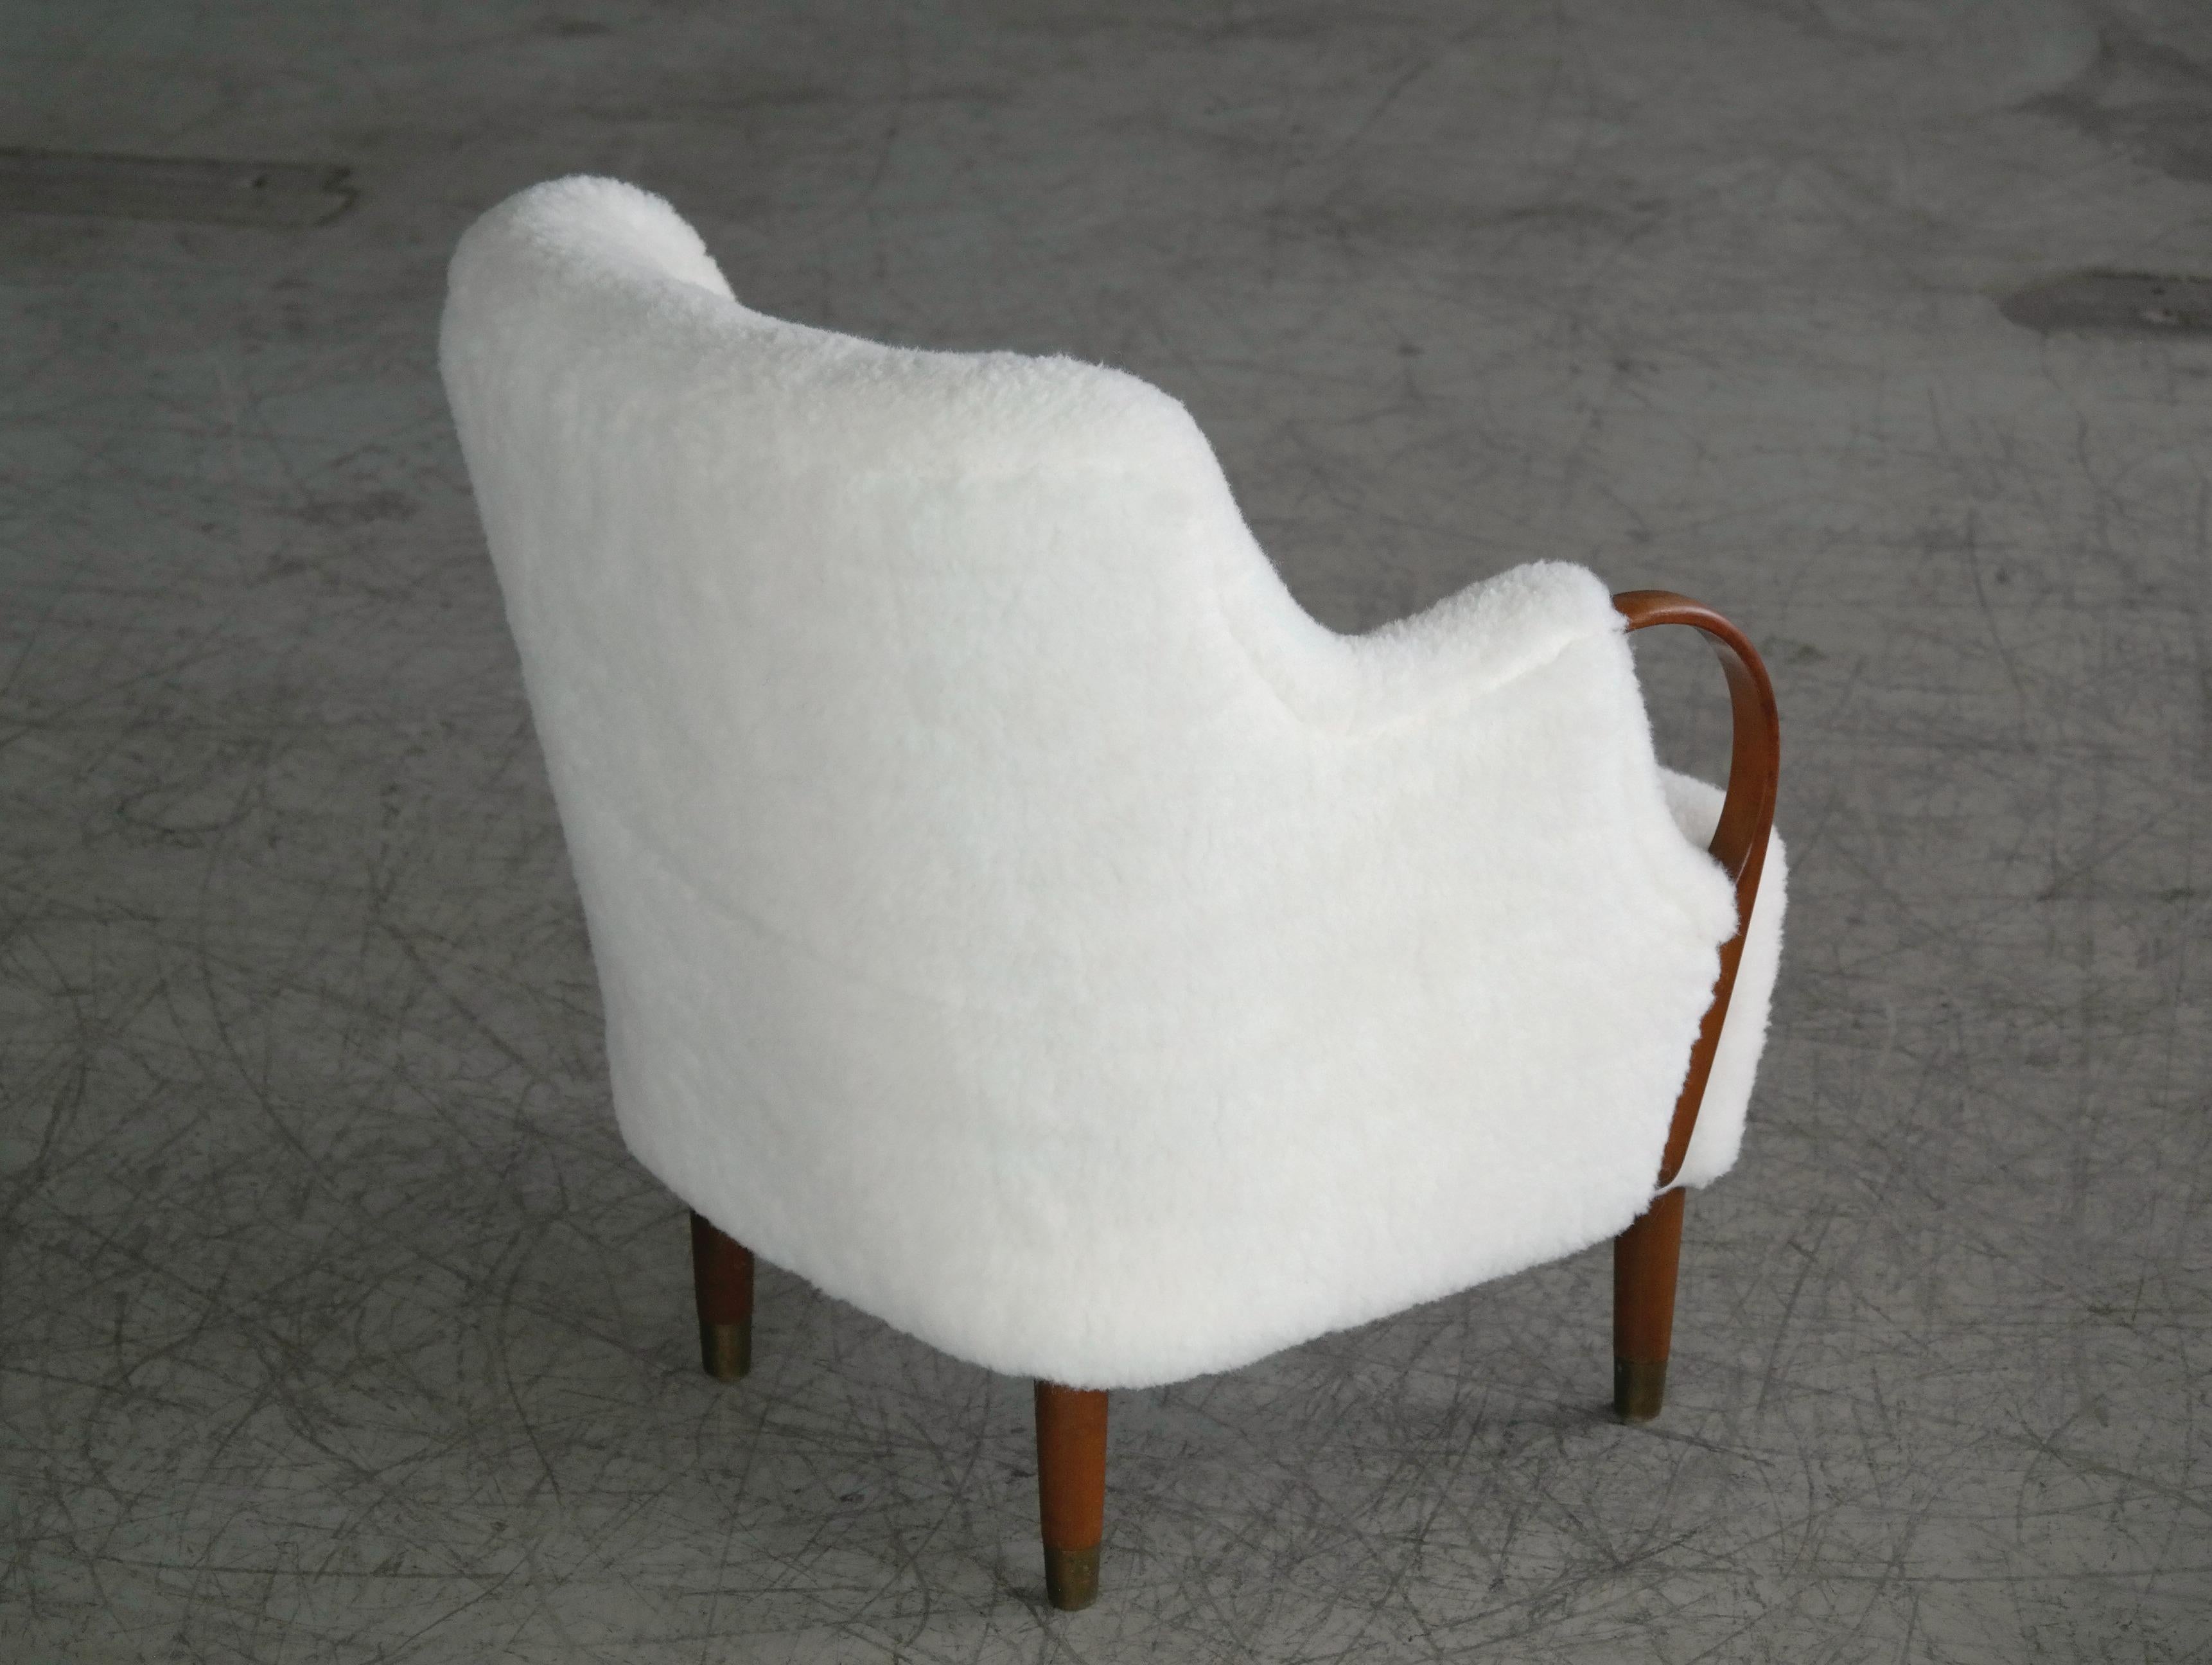 Wool Viggo Boesen Style Curved Lounge Model No. 96 in Lambswool by N.A. Jørgensen